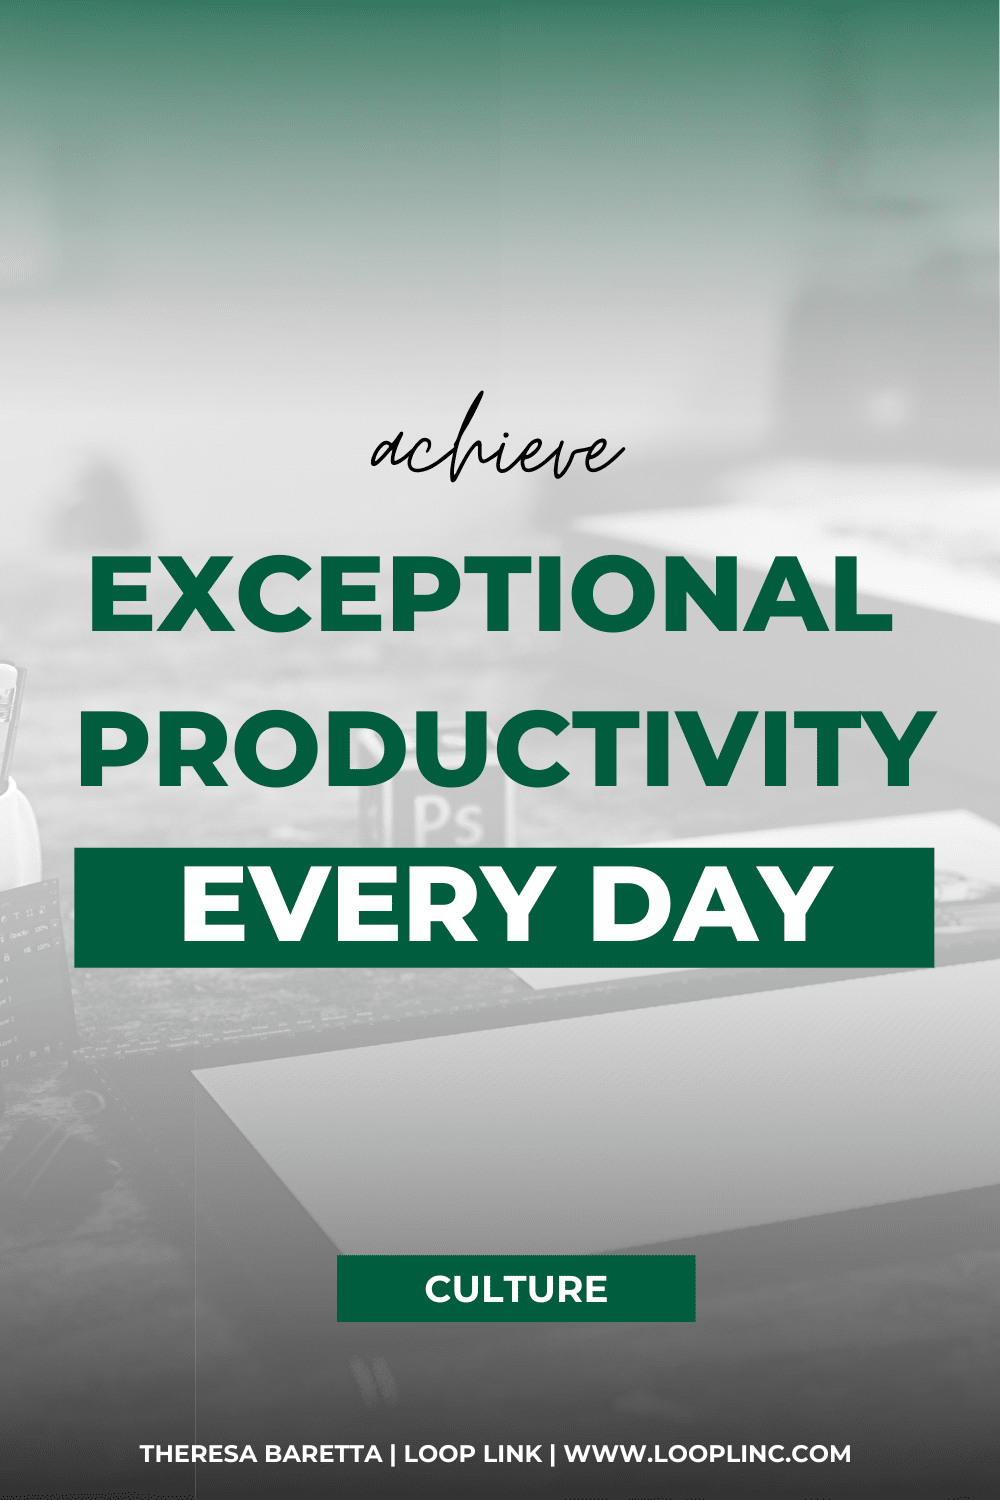 How to Achieve Exceptional Productivity Every Day